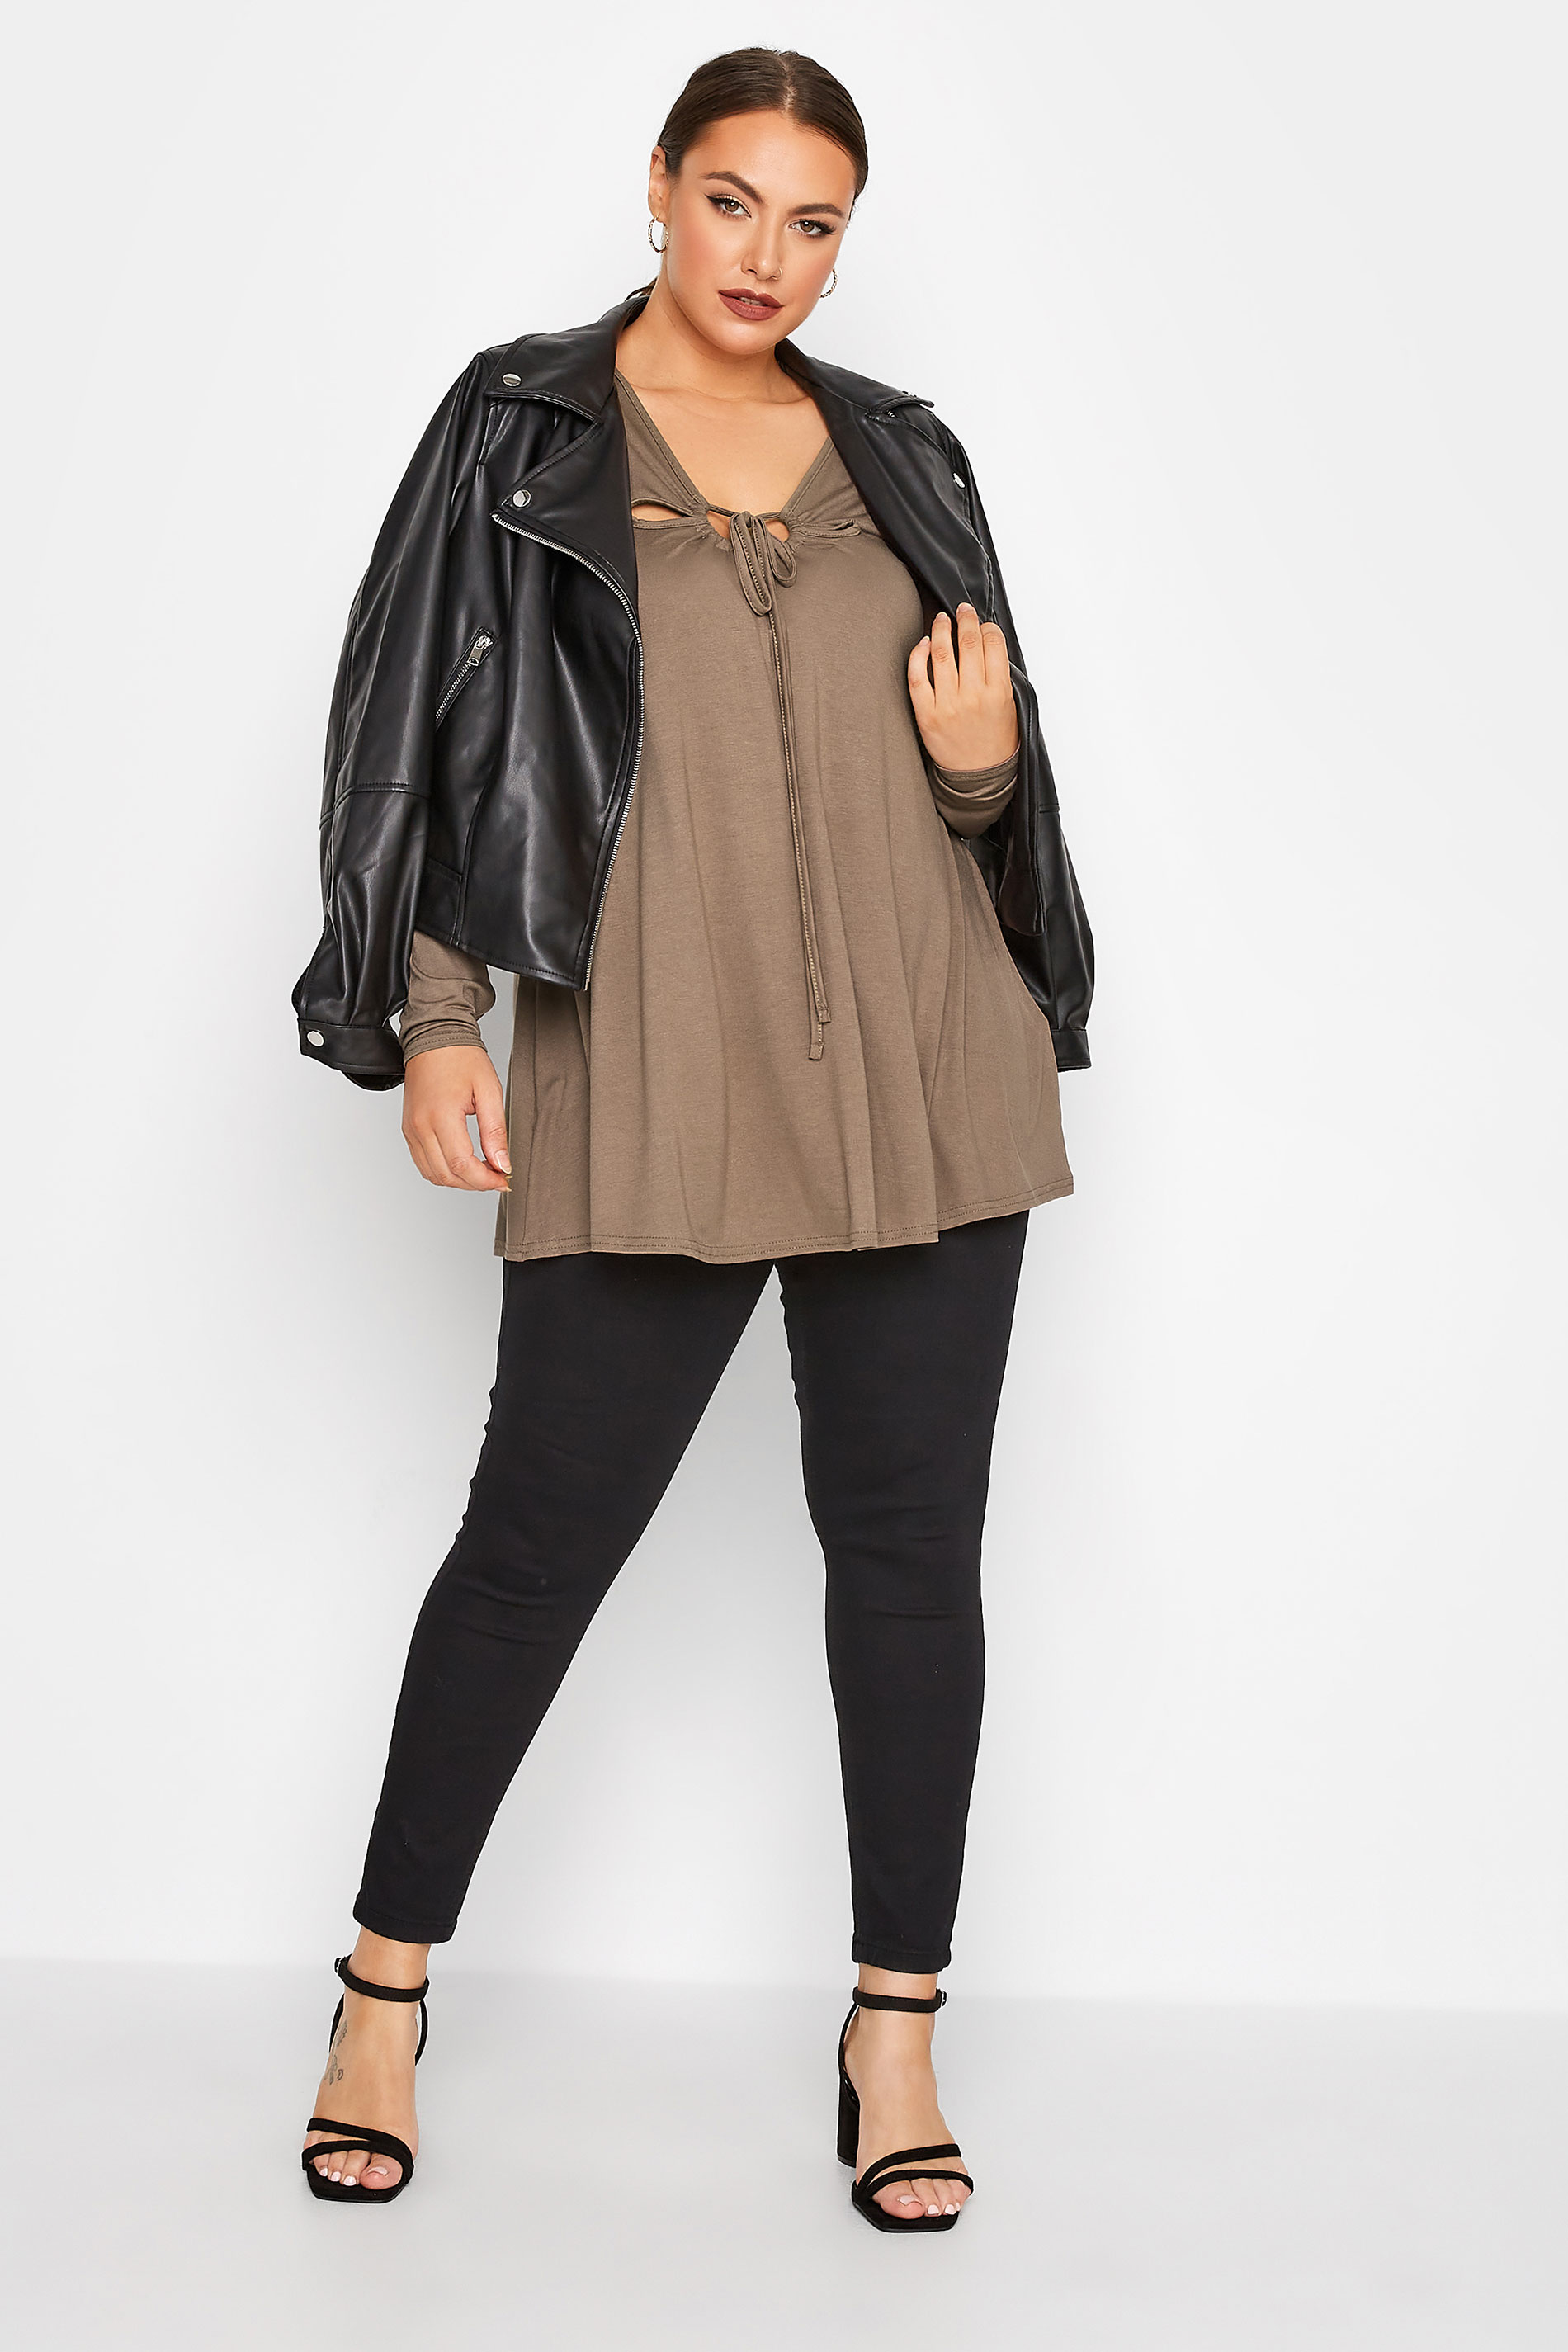 LIMITED COLLECTION Plus Size Mocha Brown Keyhole Tie Long Sleeve Top | Yours Clothing  2